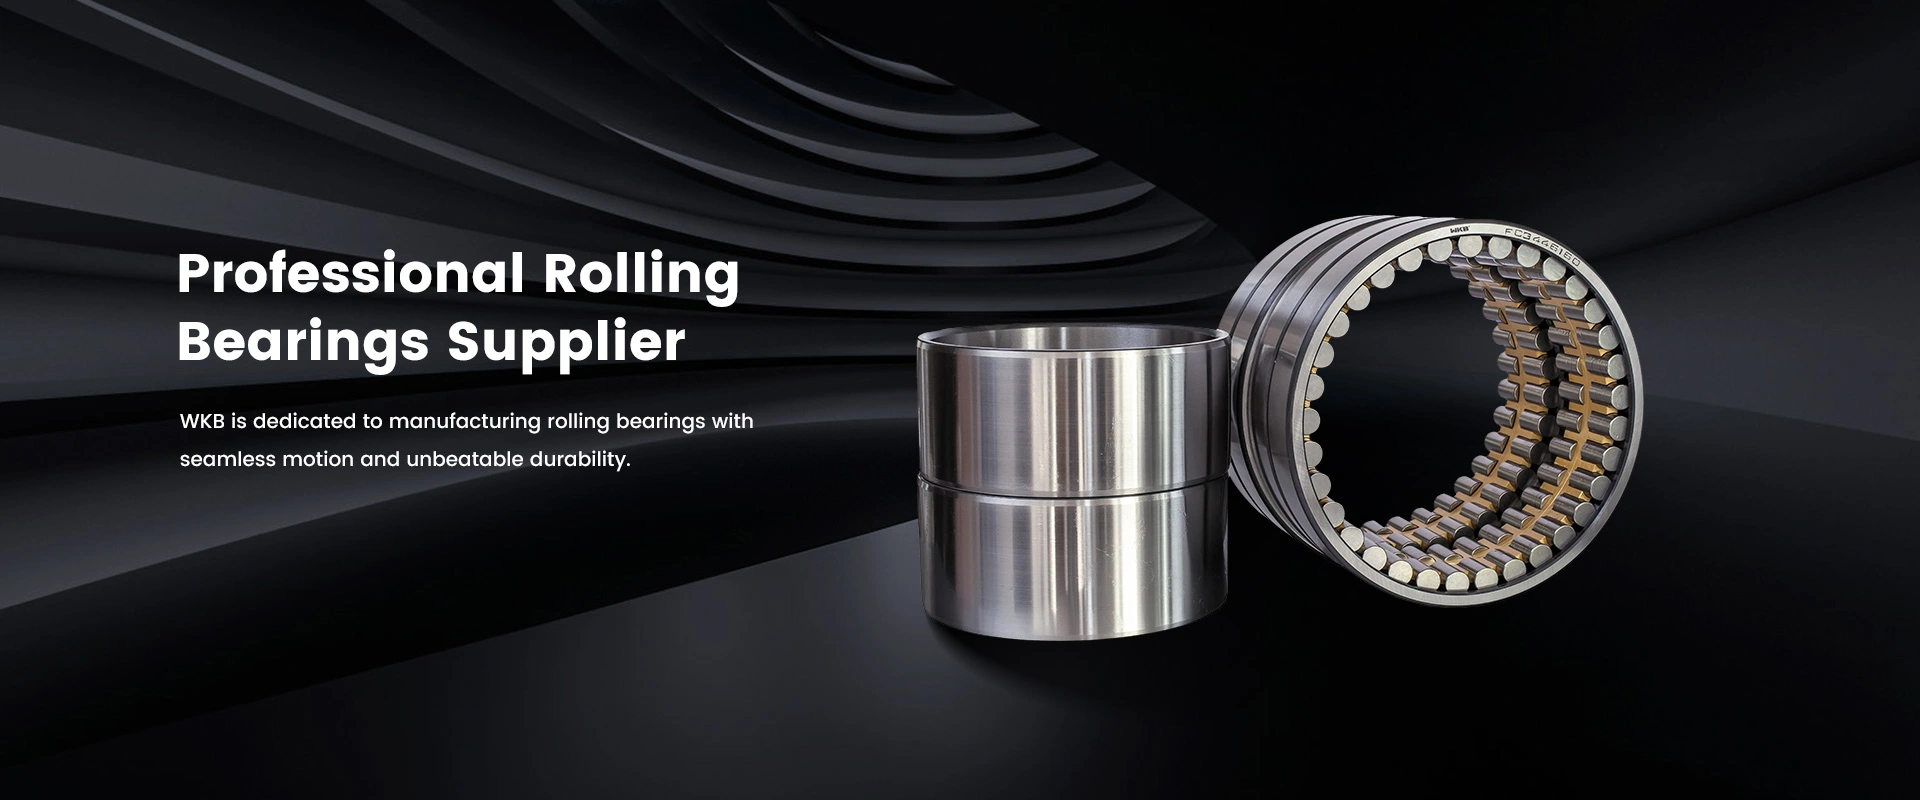 Professional Rolling Bearings Supplier